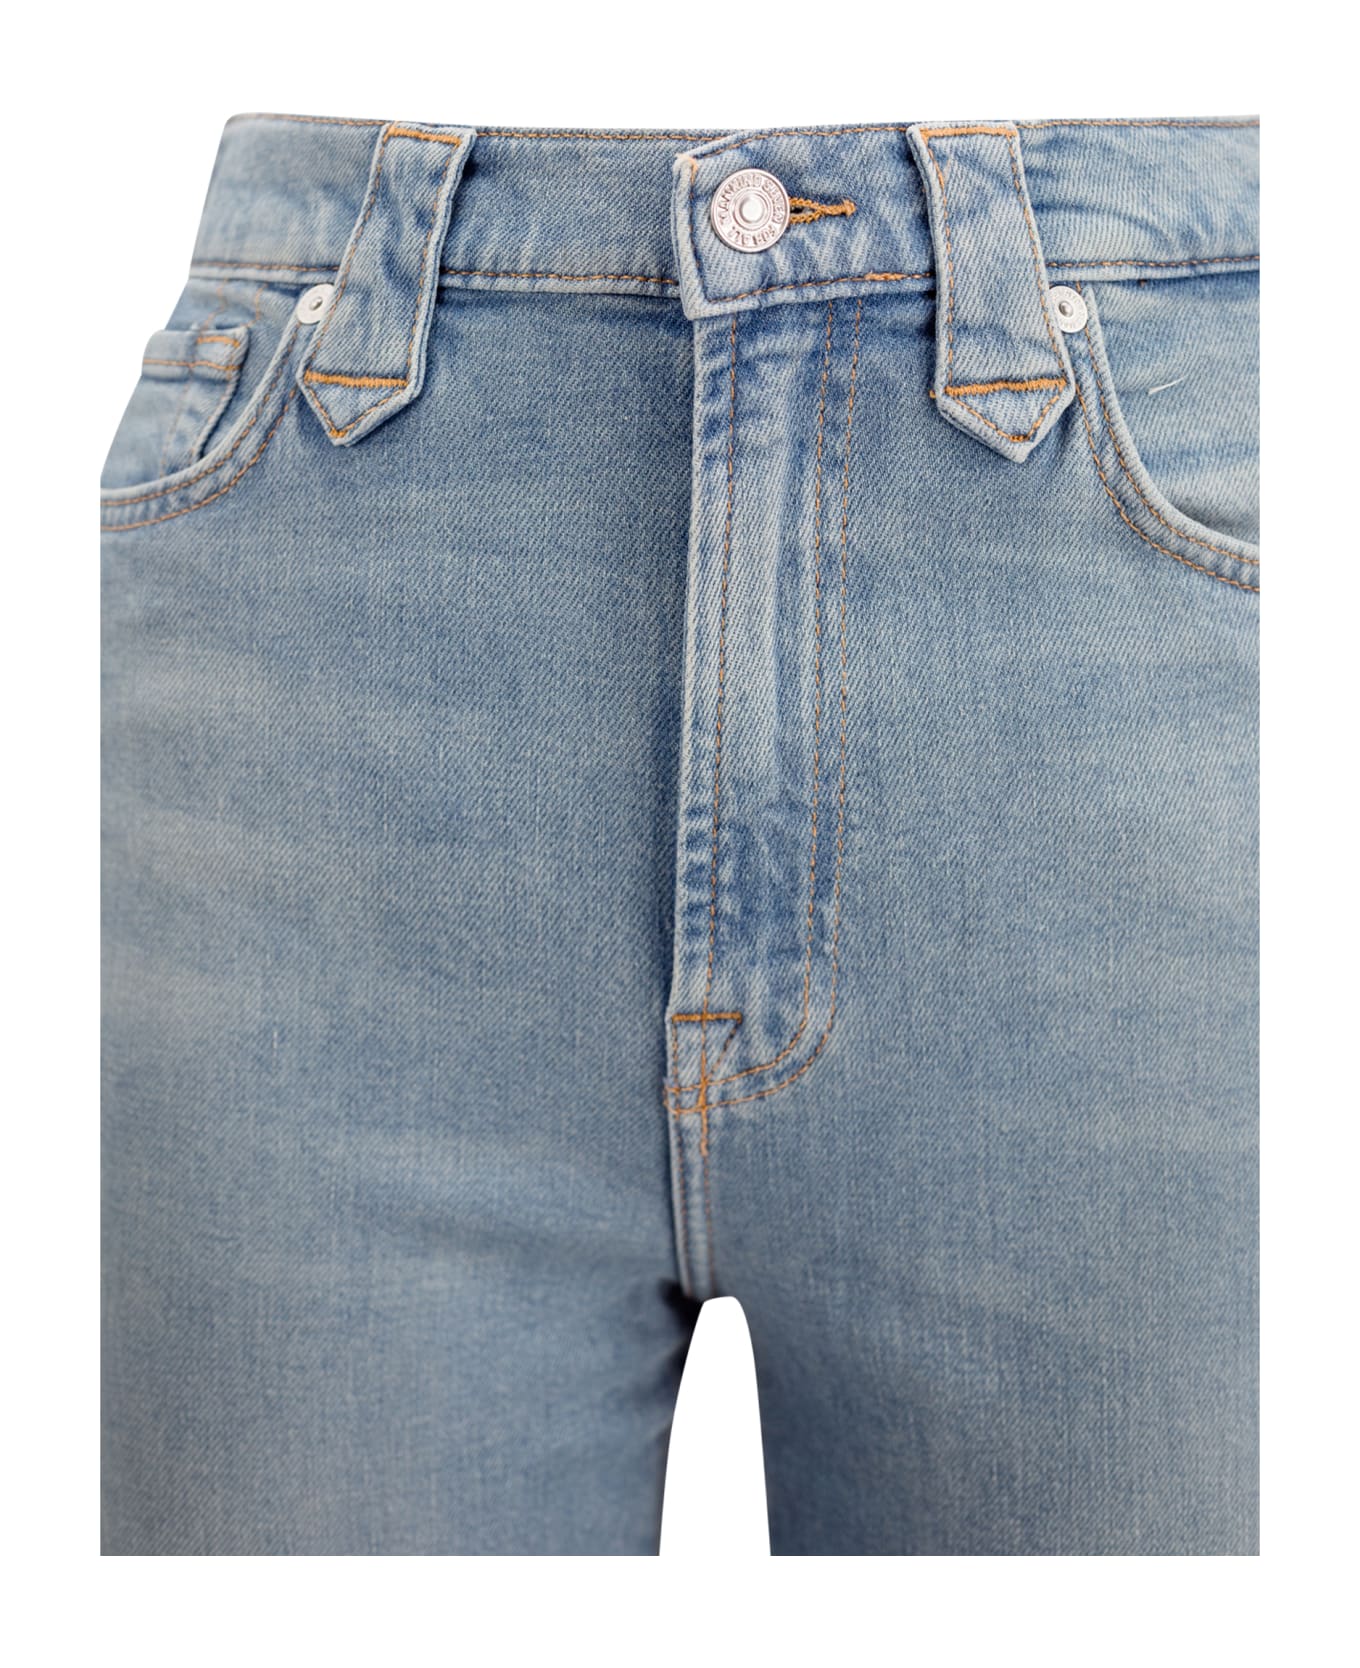 7 For All Mankind High-waisted Flared Jeans - Denim